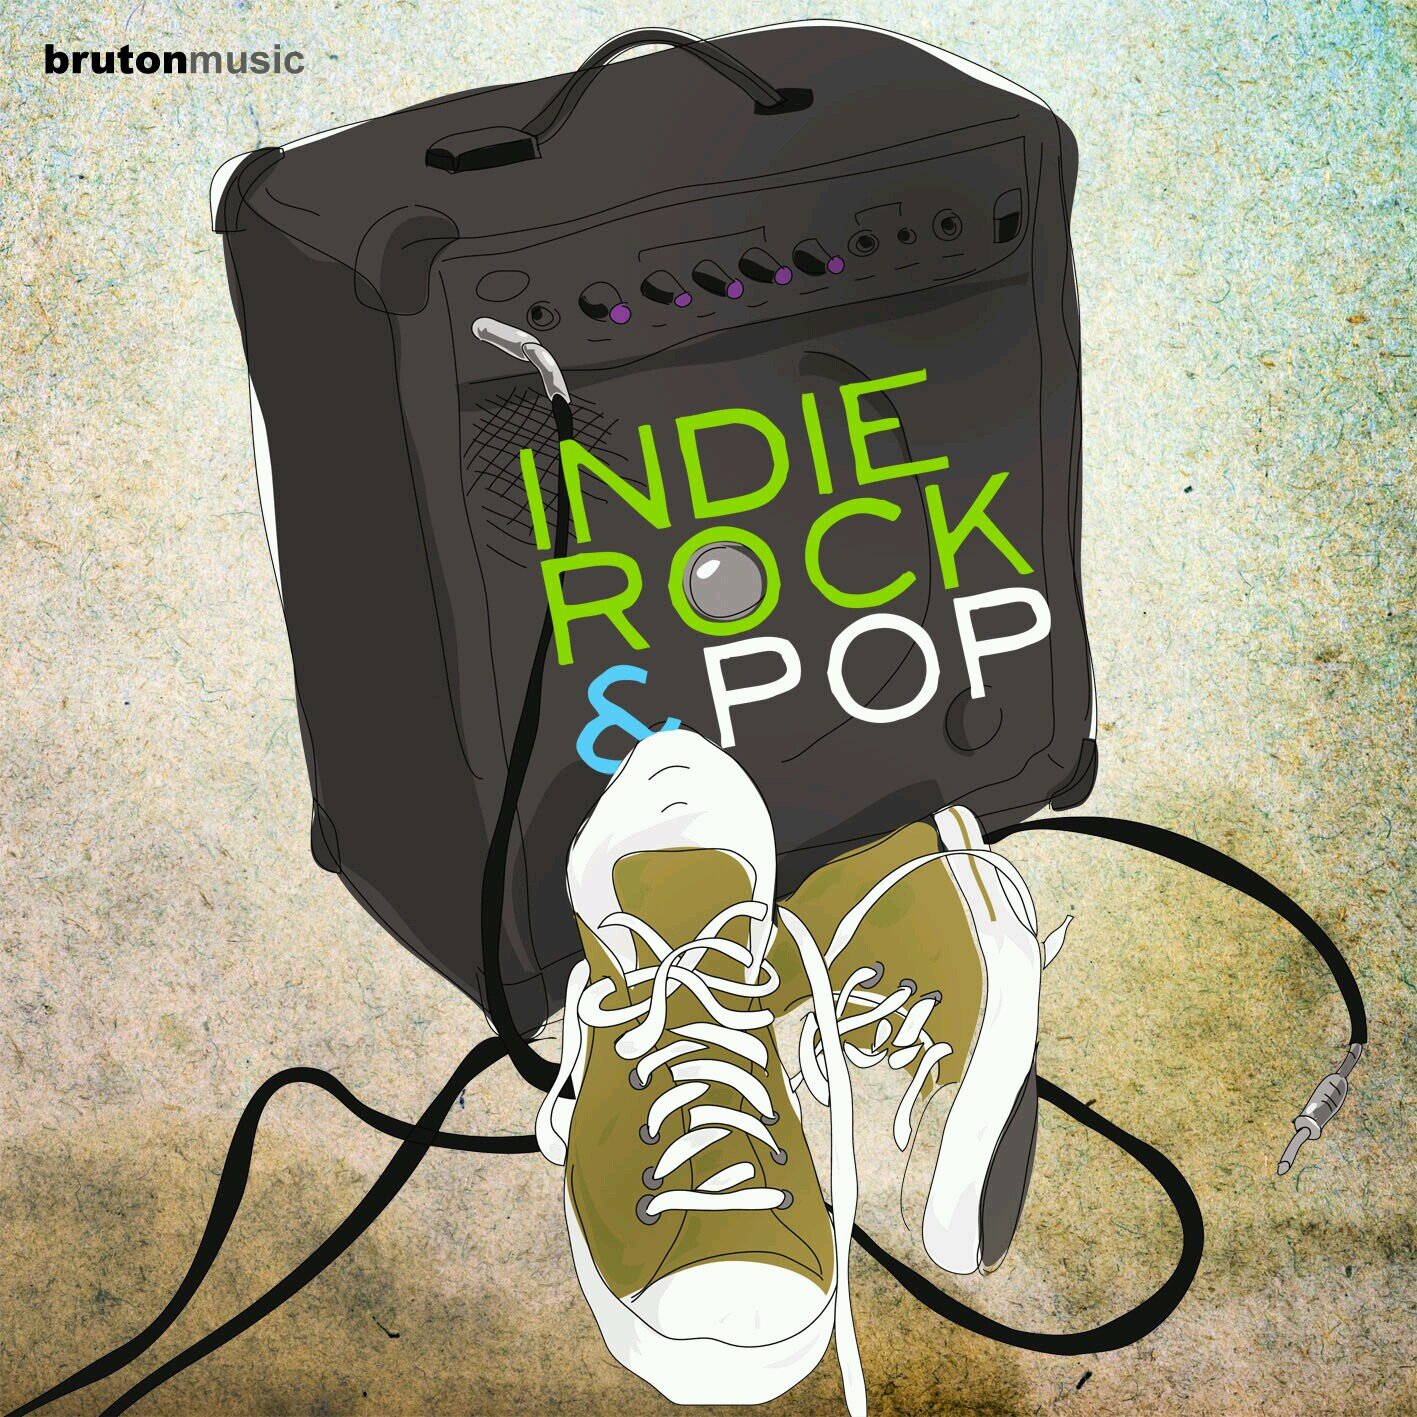 Arctic Monkeys and other Indie Rock stuff